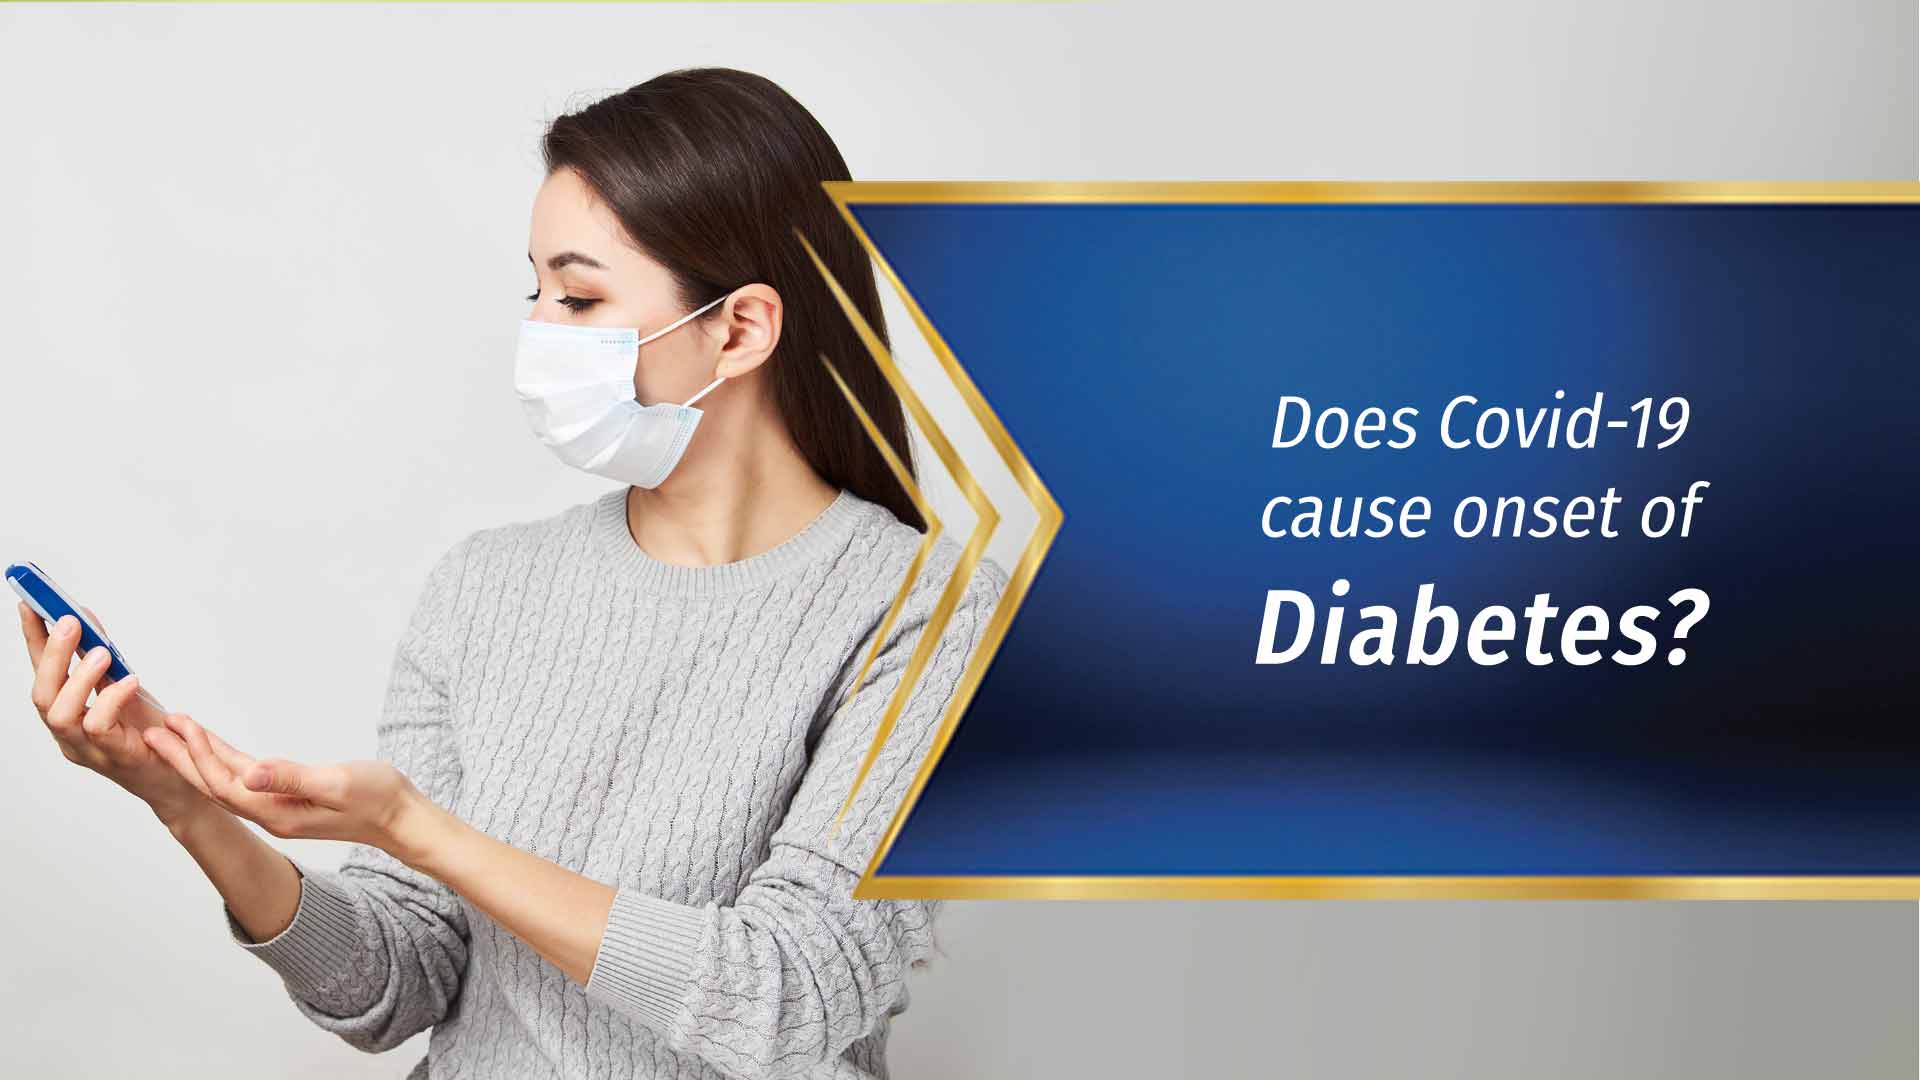 Does Covid-19 cause onset of diabetes?